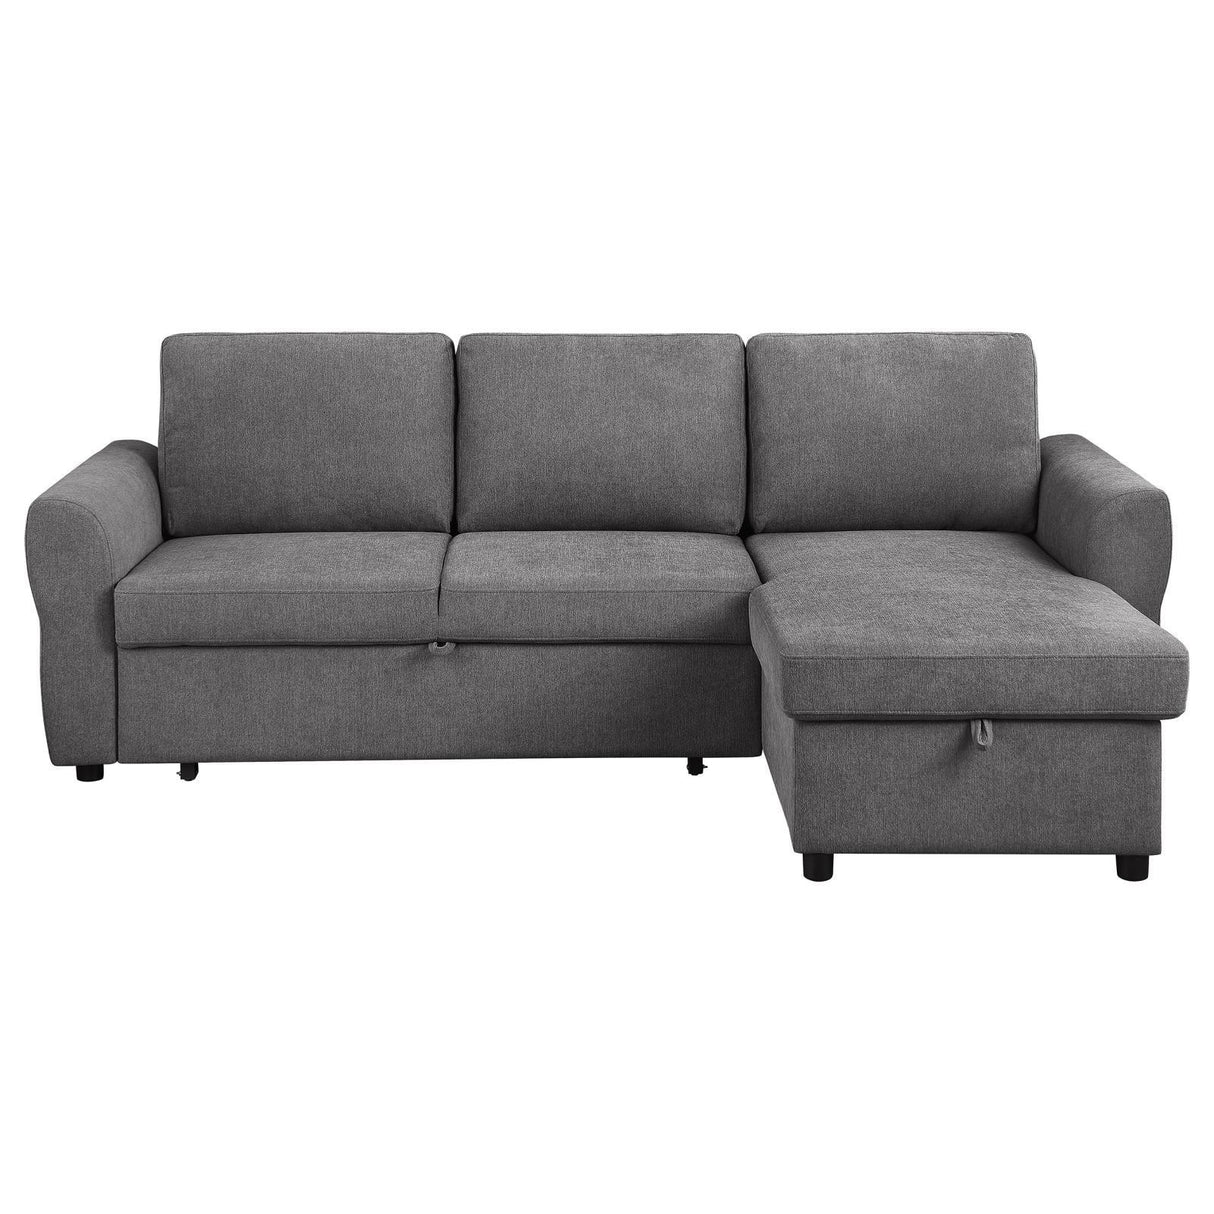 Samantha Upholstered Sleeper Sofa Sectional With Storage Chaise Grey 511088 - Ella Furniture